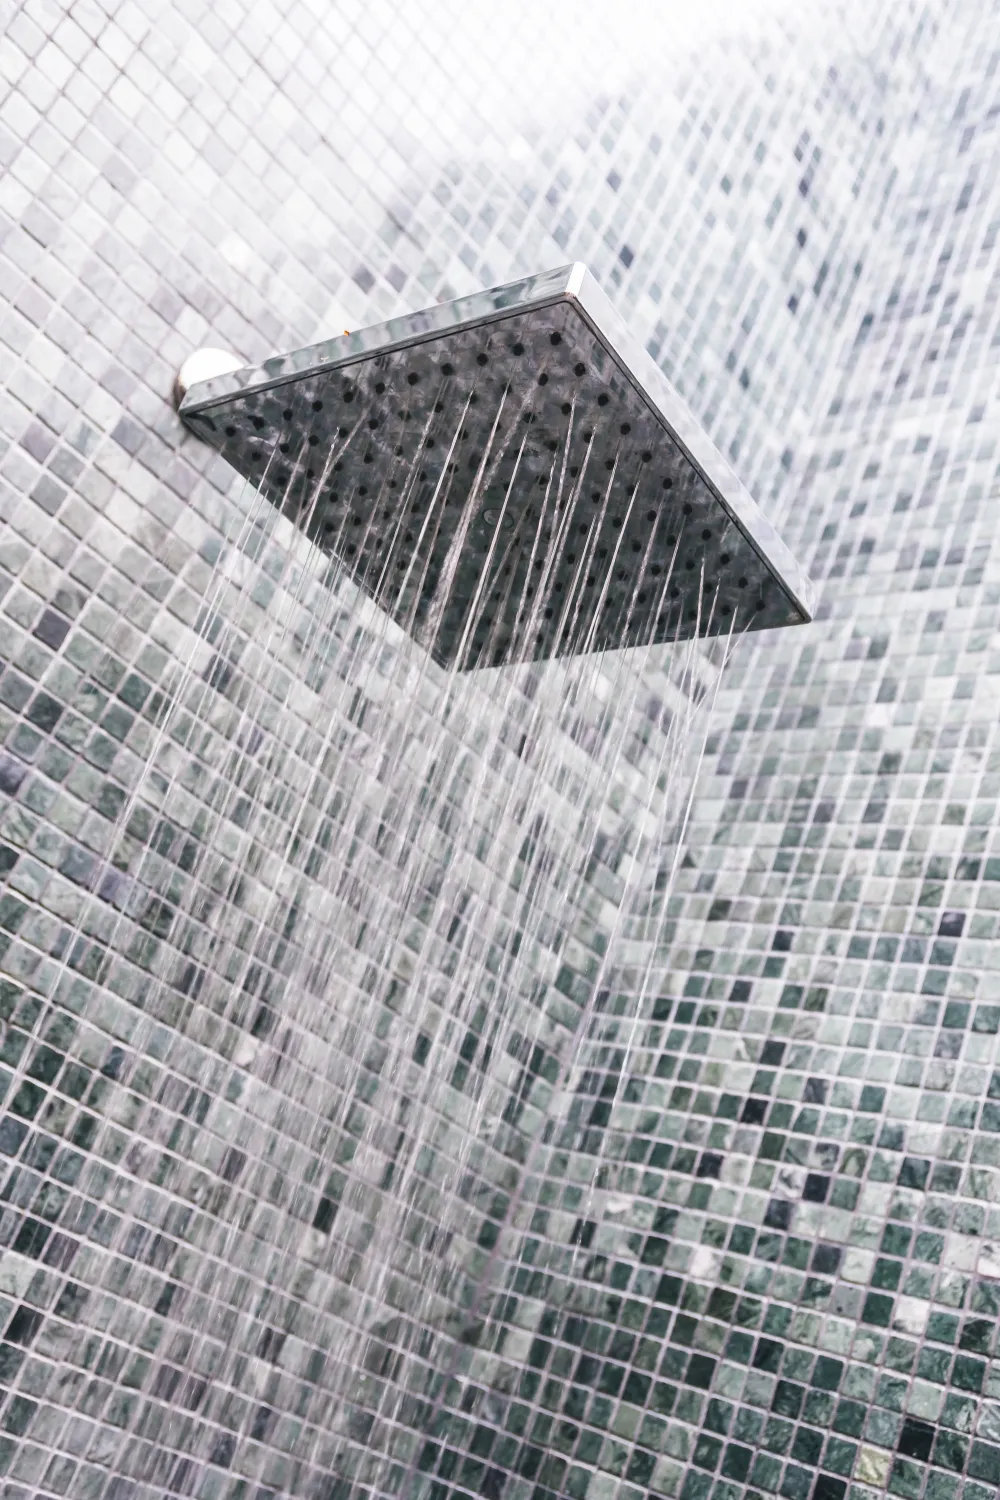 Rain showerheads are one of the best types of showerheads to update your bathroom and create a spa-like experience.